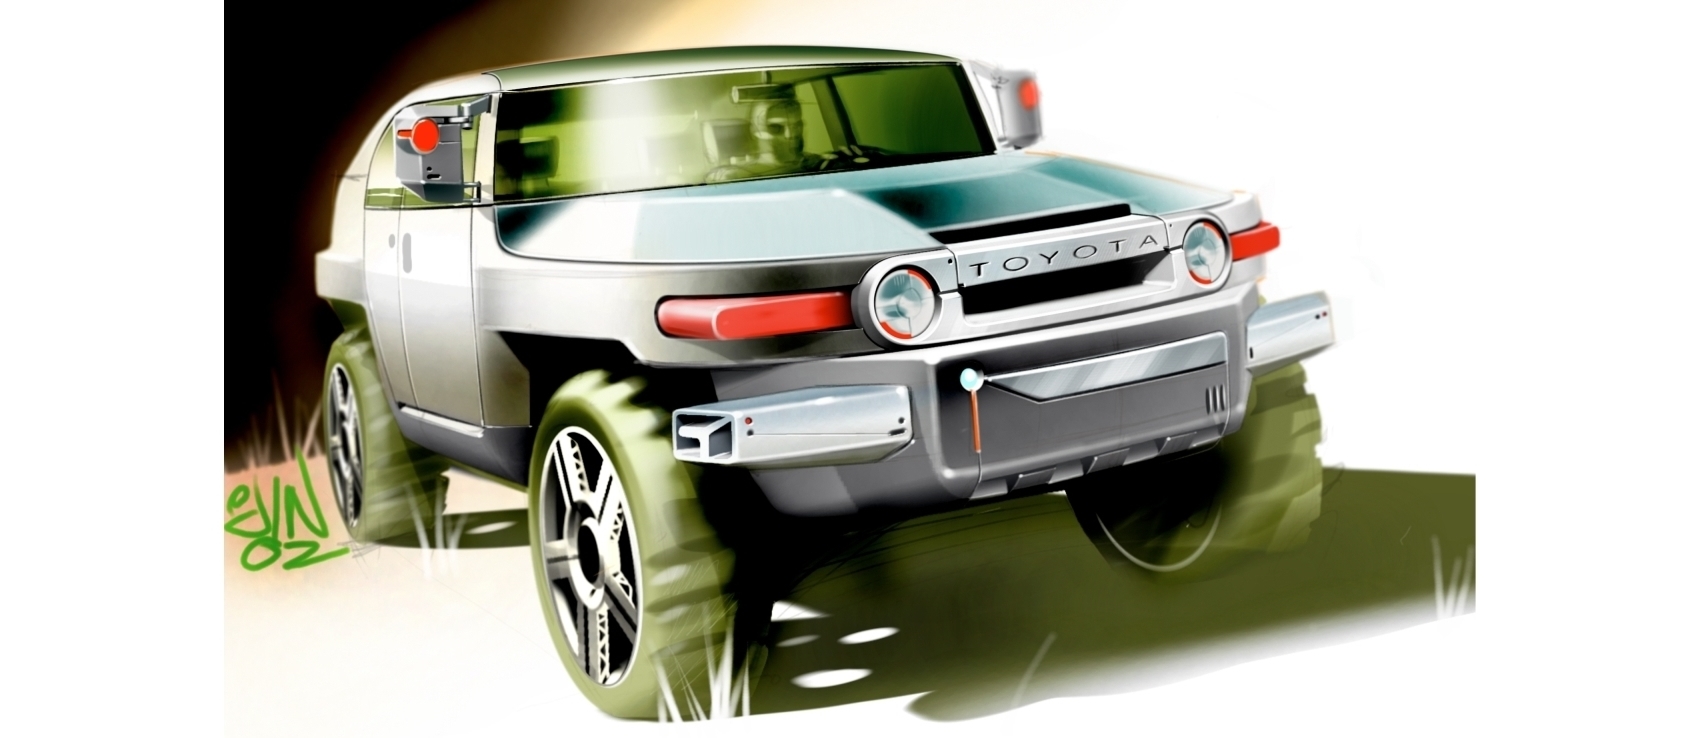 Toyota FJ Cruiser (unveiled as concept at the North American International Auto Show in 2003)